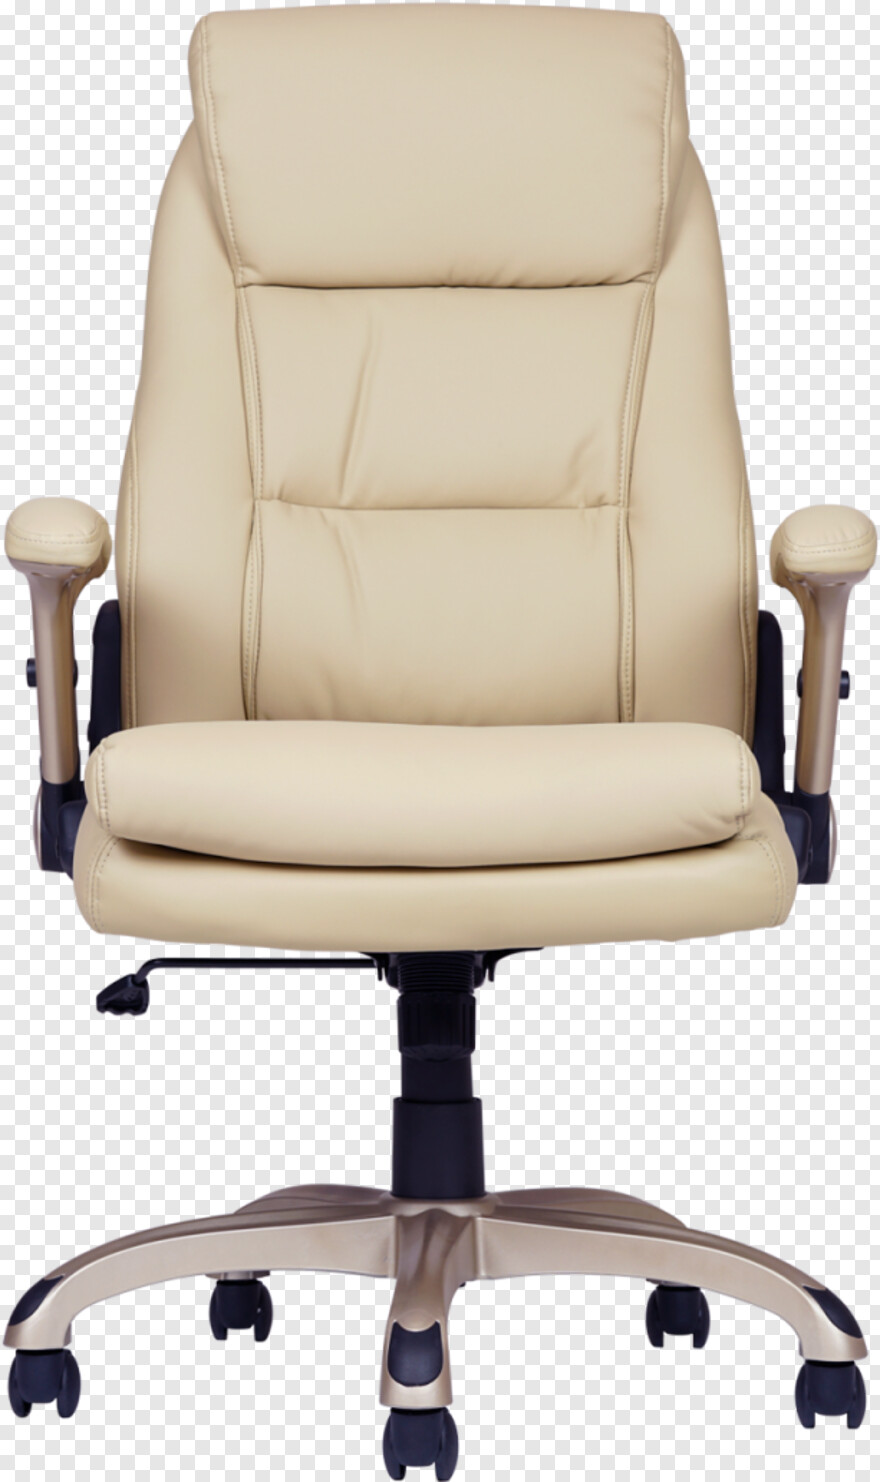 office-chair # 452005